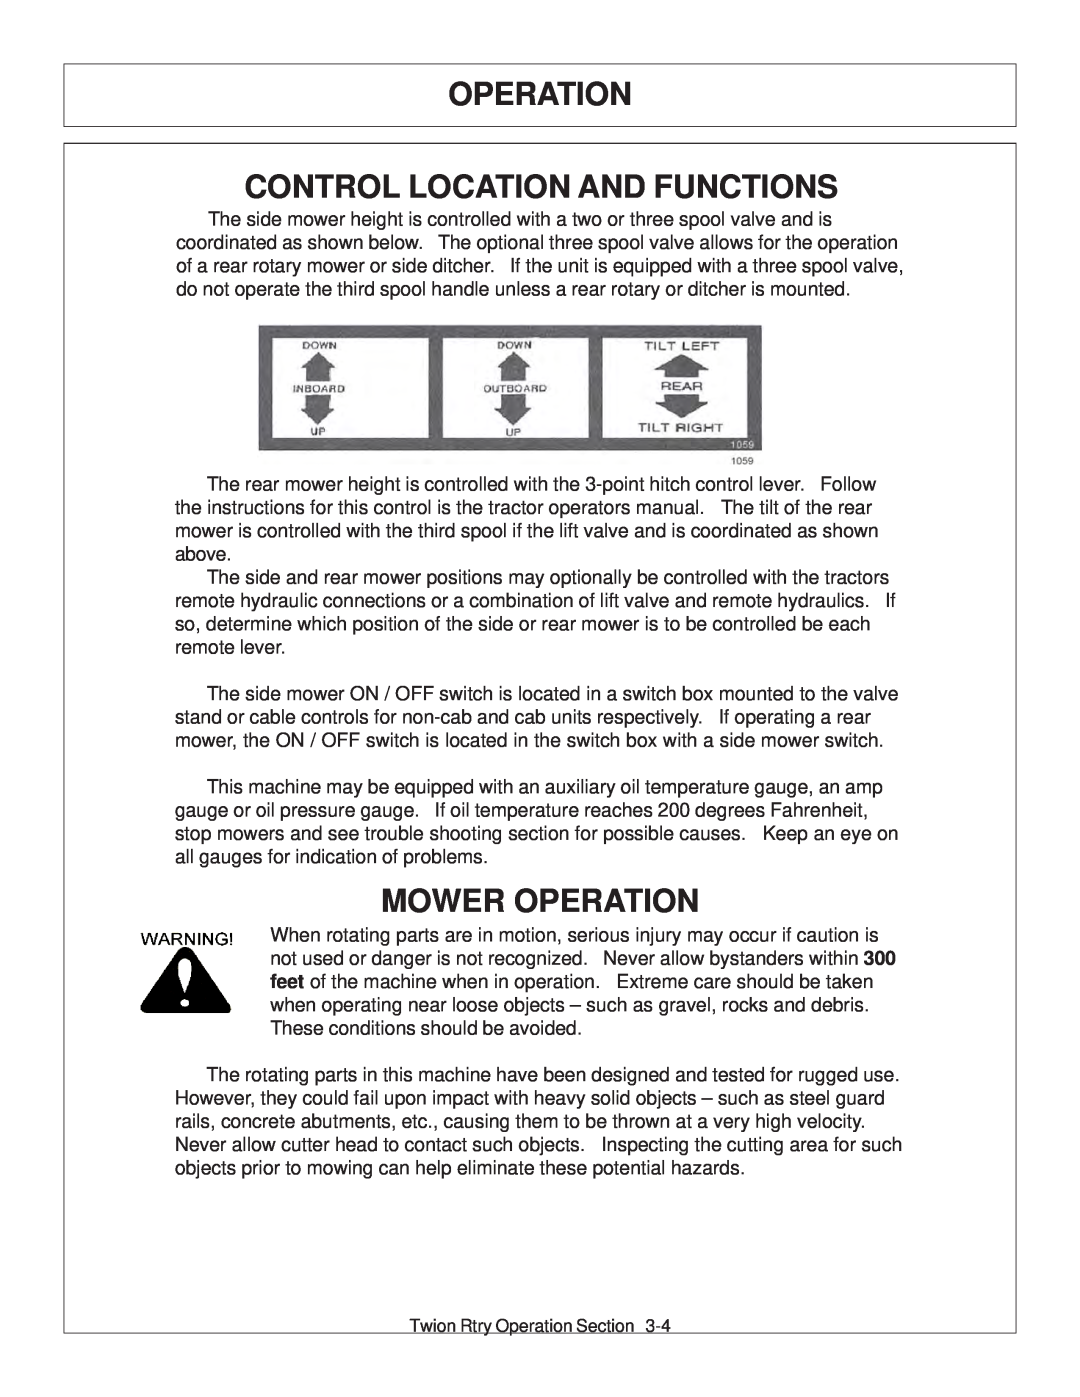 Tiger Products Co., Ltd 6020009 manual Operation Control Location And Functions, Mower Operation 